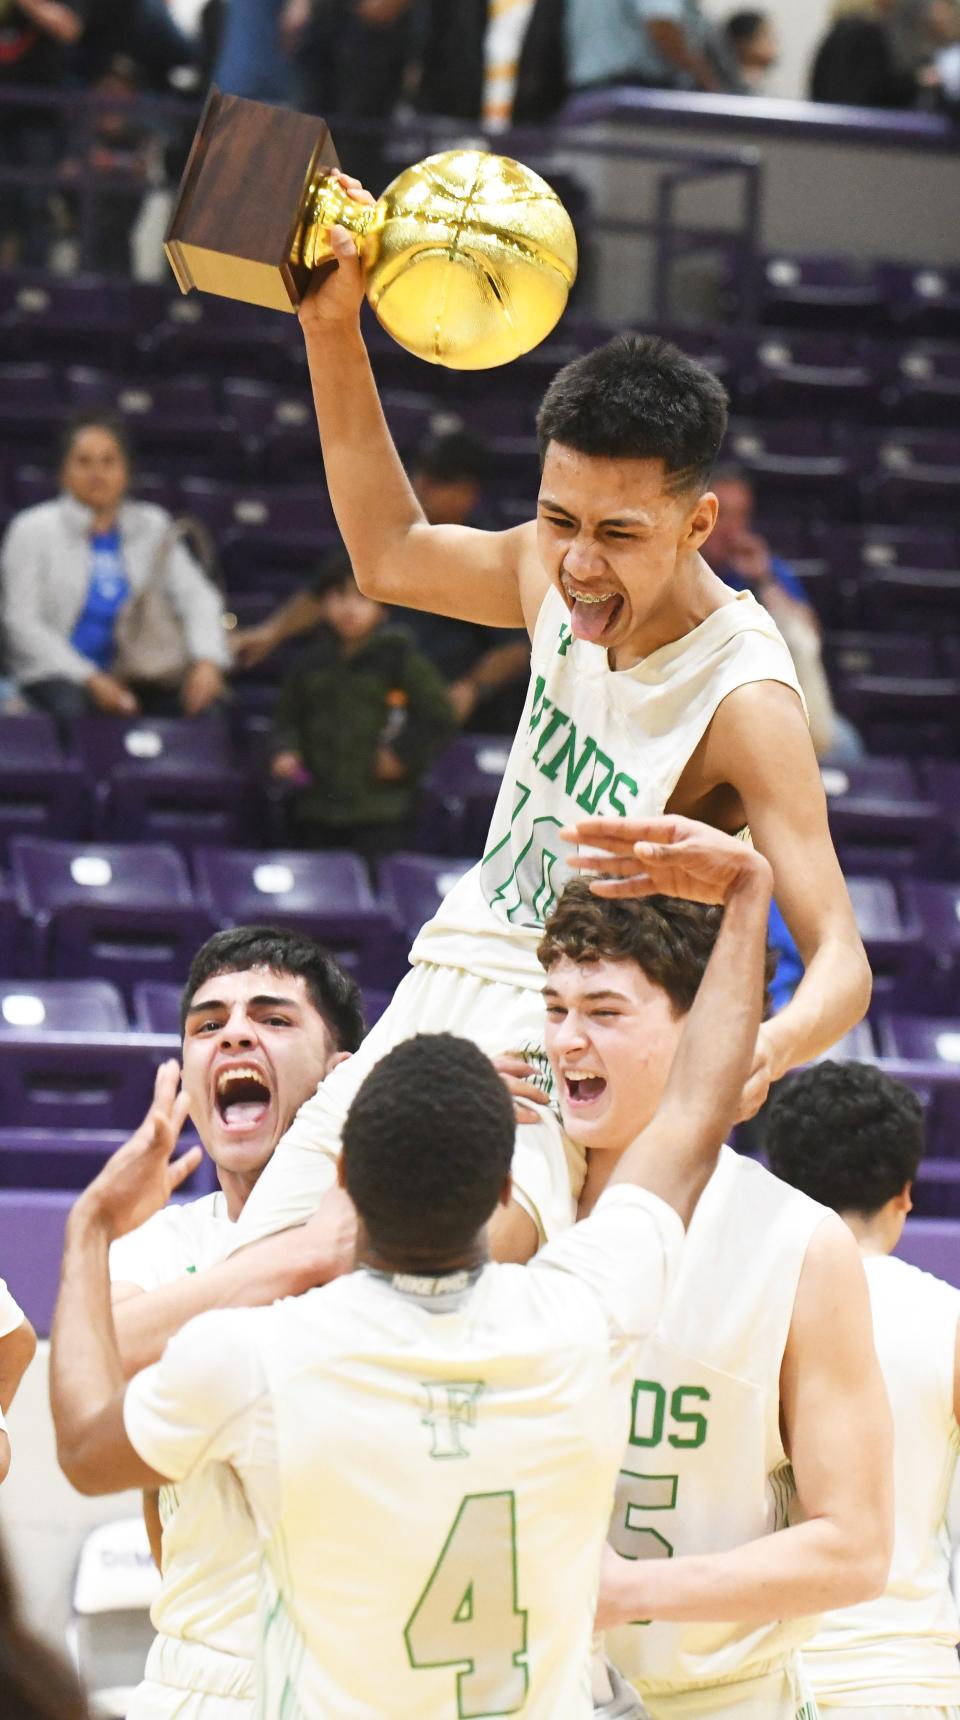 Floydada's Abran Castillo lifts the trophy as teammates lift him up after beating Farwell in a Region I-2A quarterfinal Tuesday, Feb. 28, 2023, at Kenneth Cleveland Gymnasium in Dimmitt.